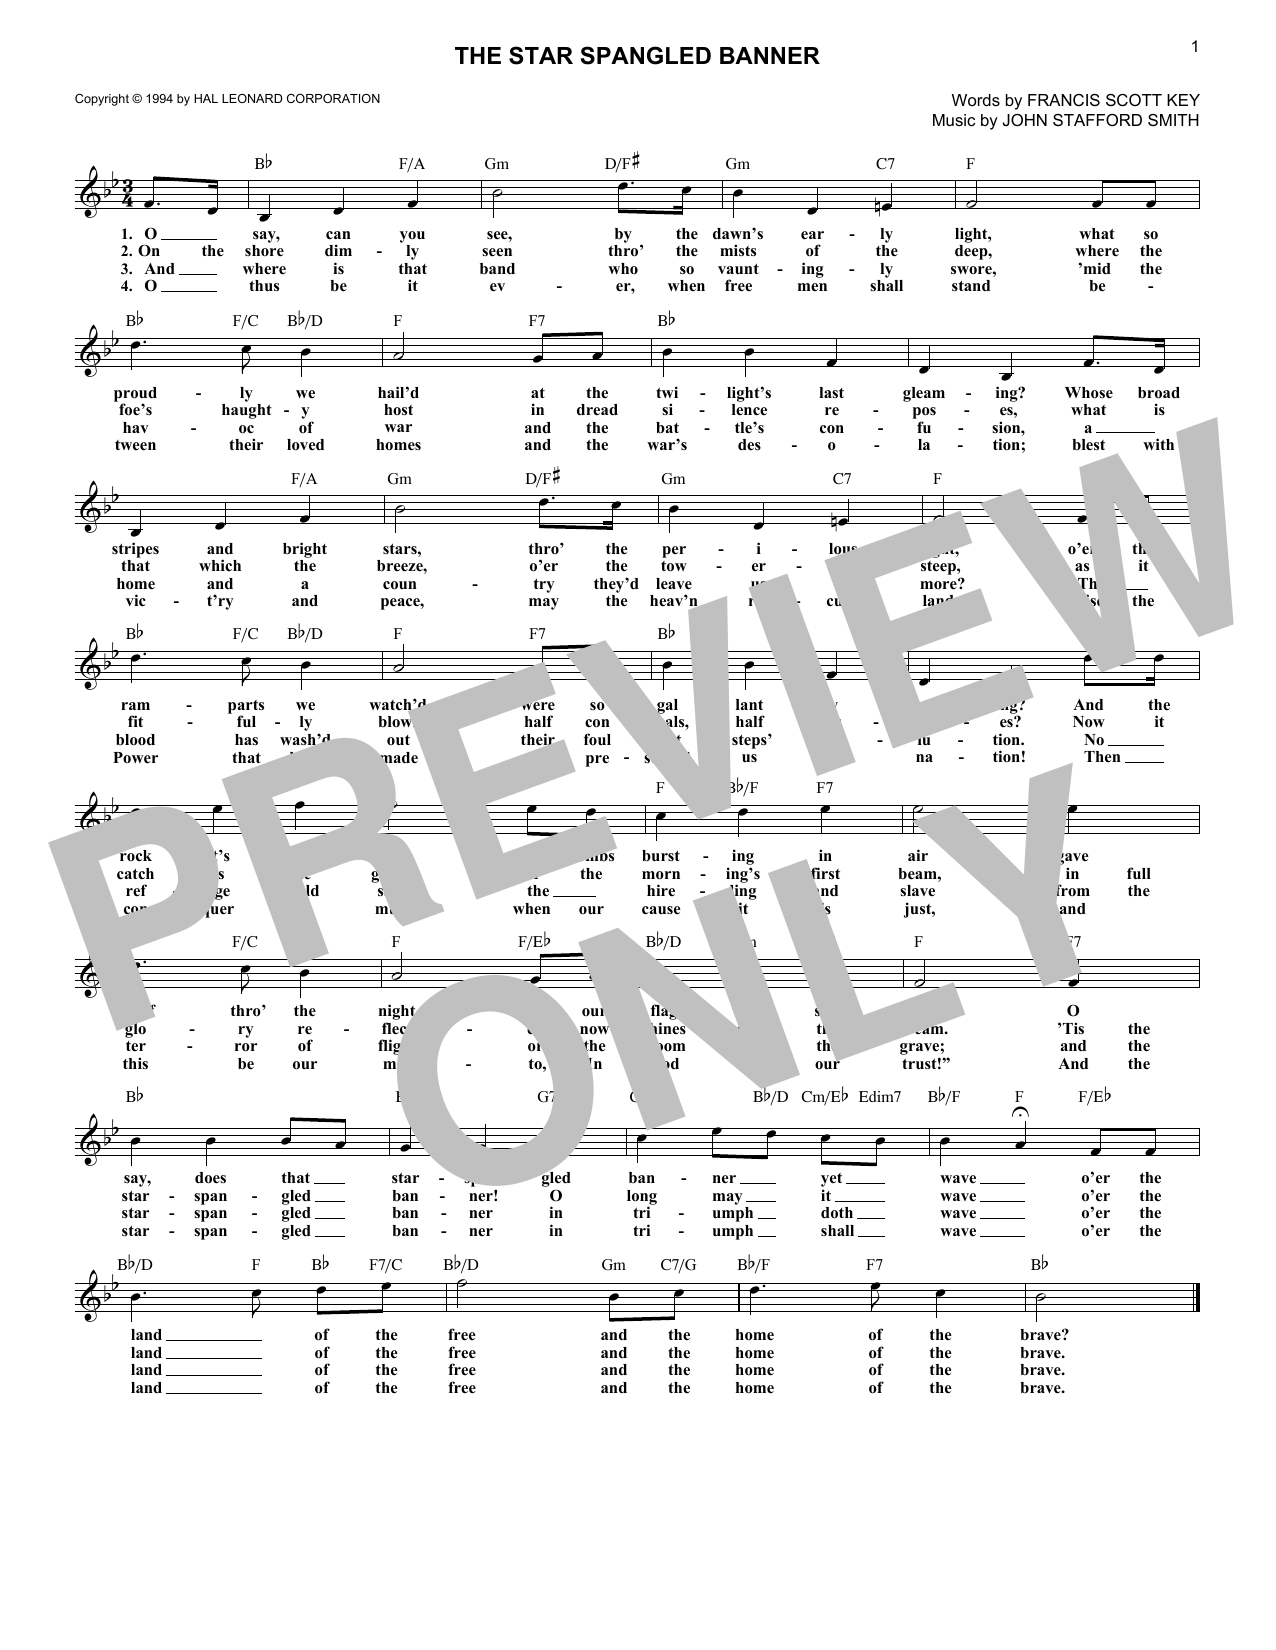 Download Francis Scott Key The Star-Spangled Banner Sheet Music